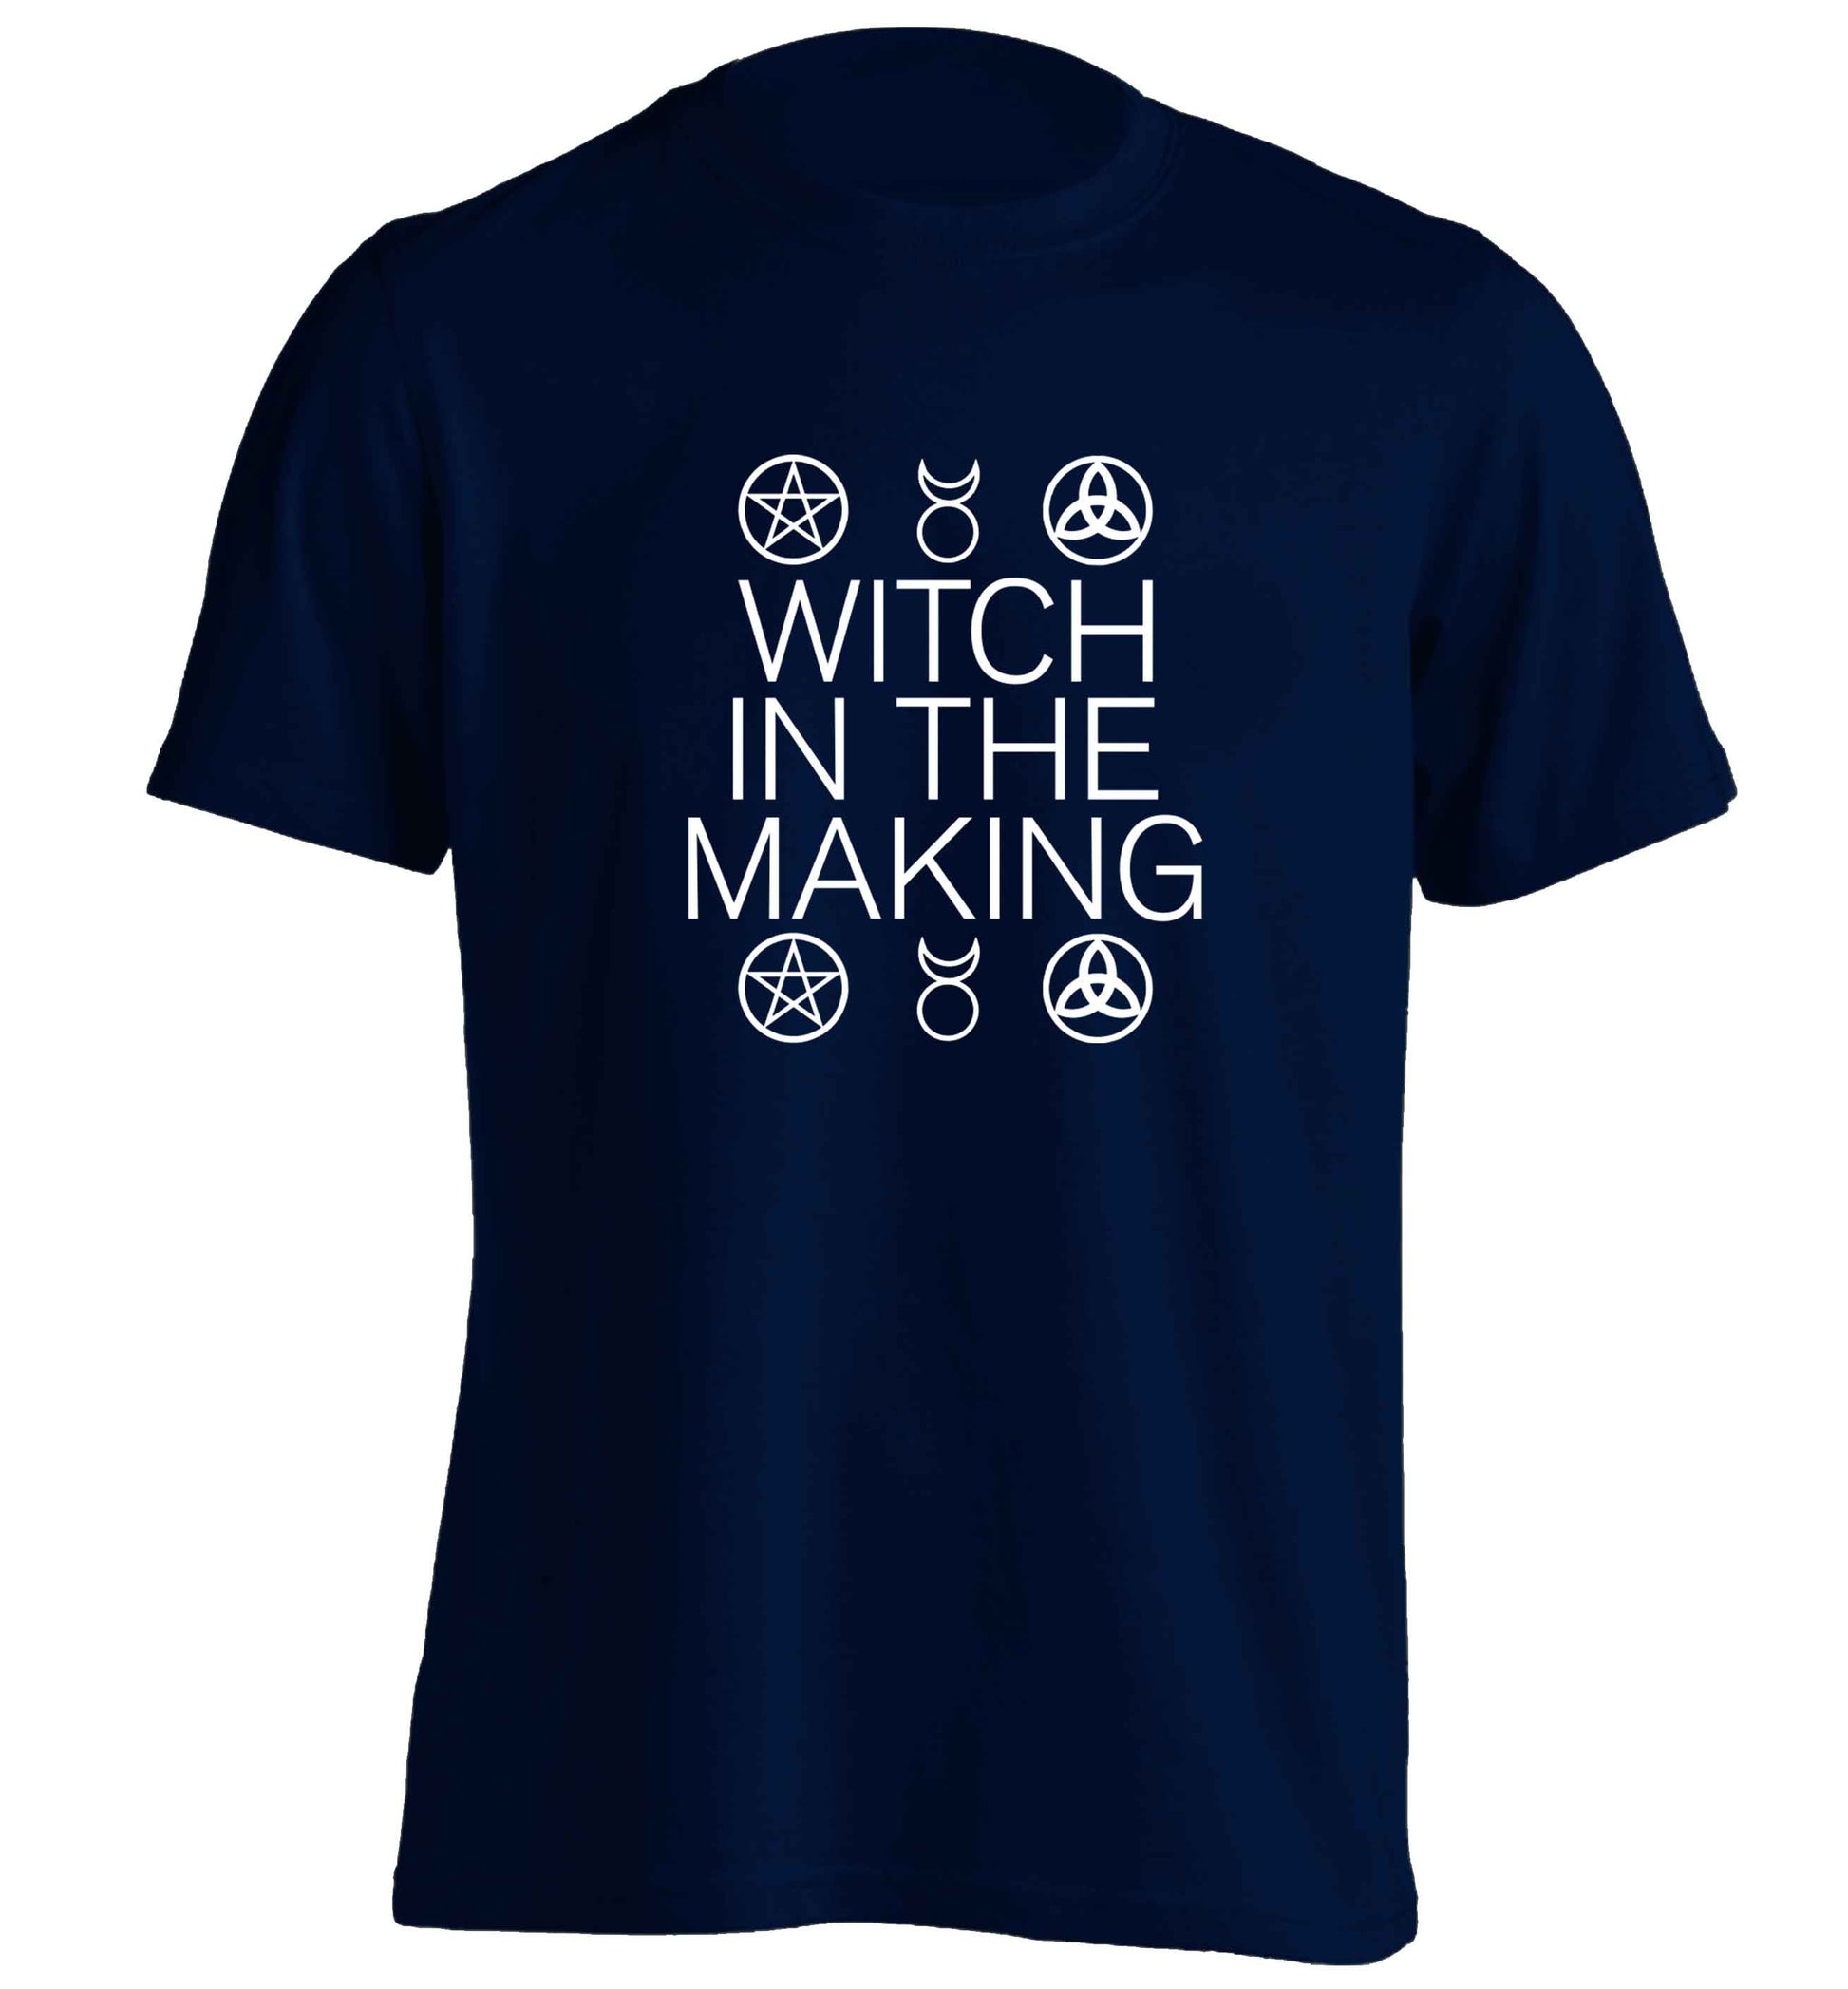 Witch in the making adults unisex navy Tshirt 2XL